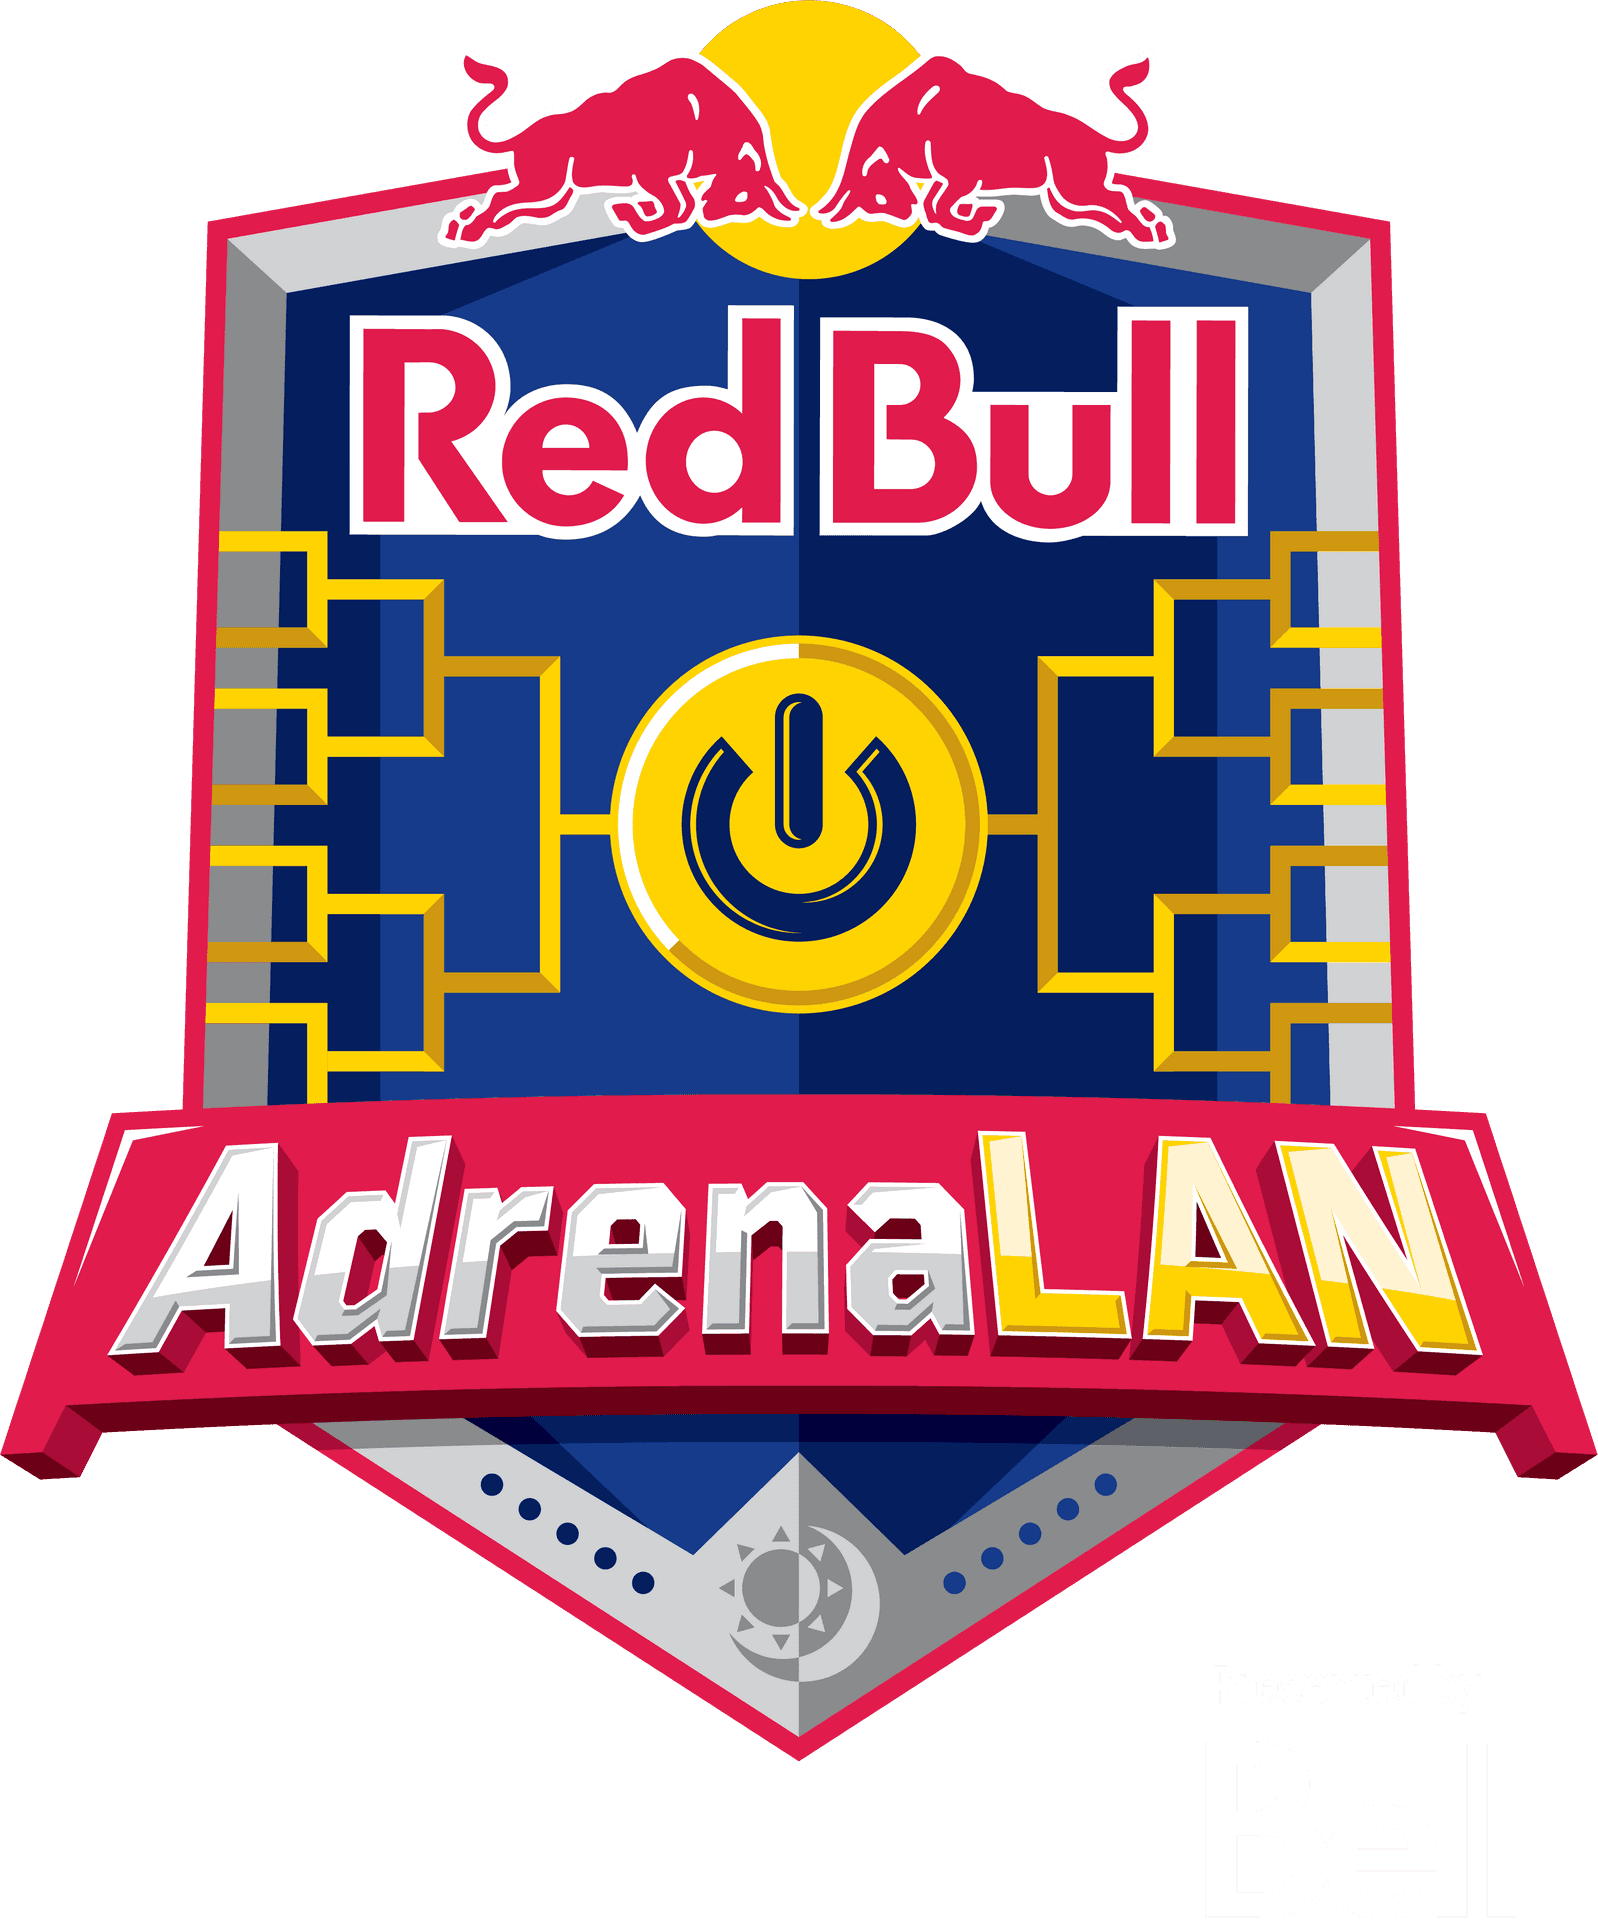 Red Bull Adrena L A N Event Logo PNG